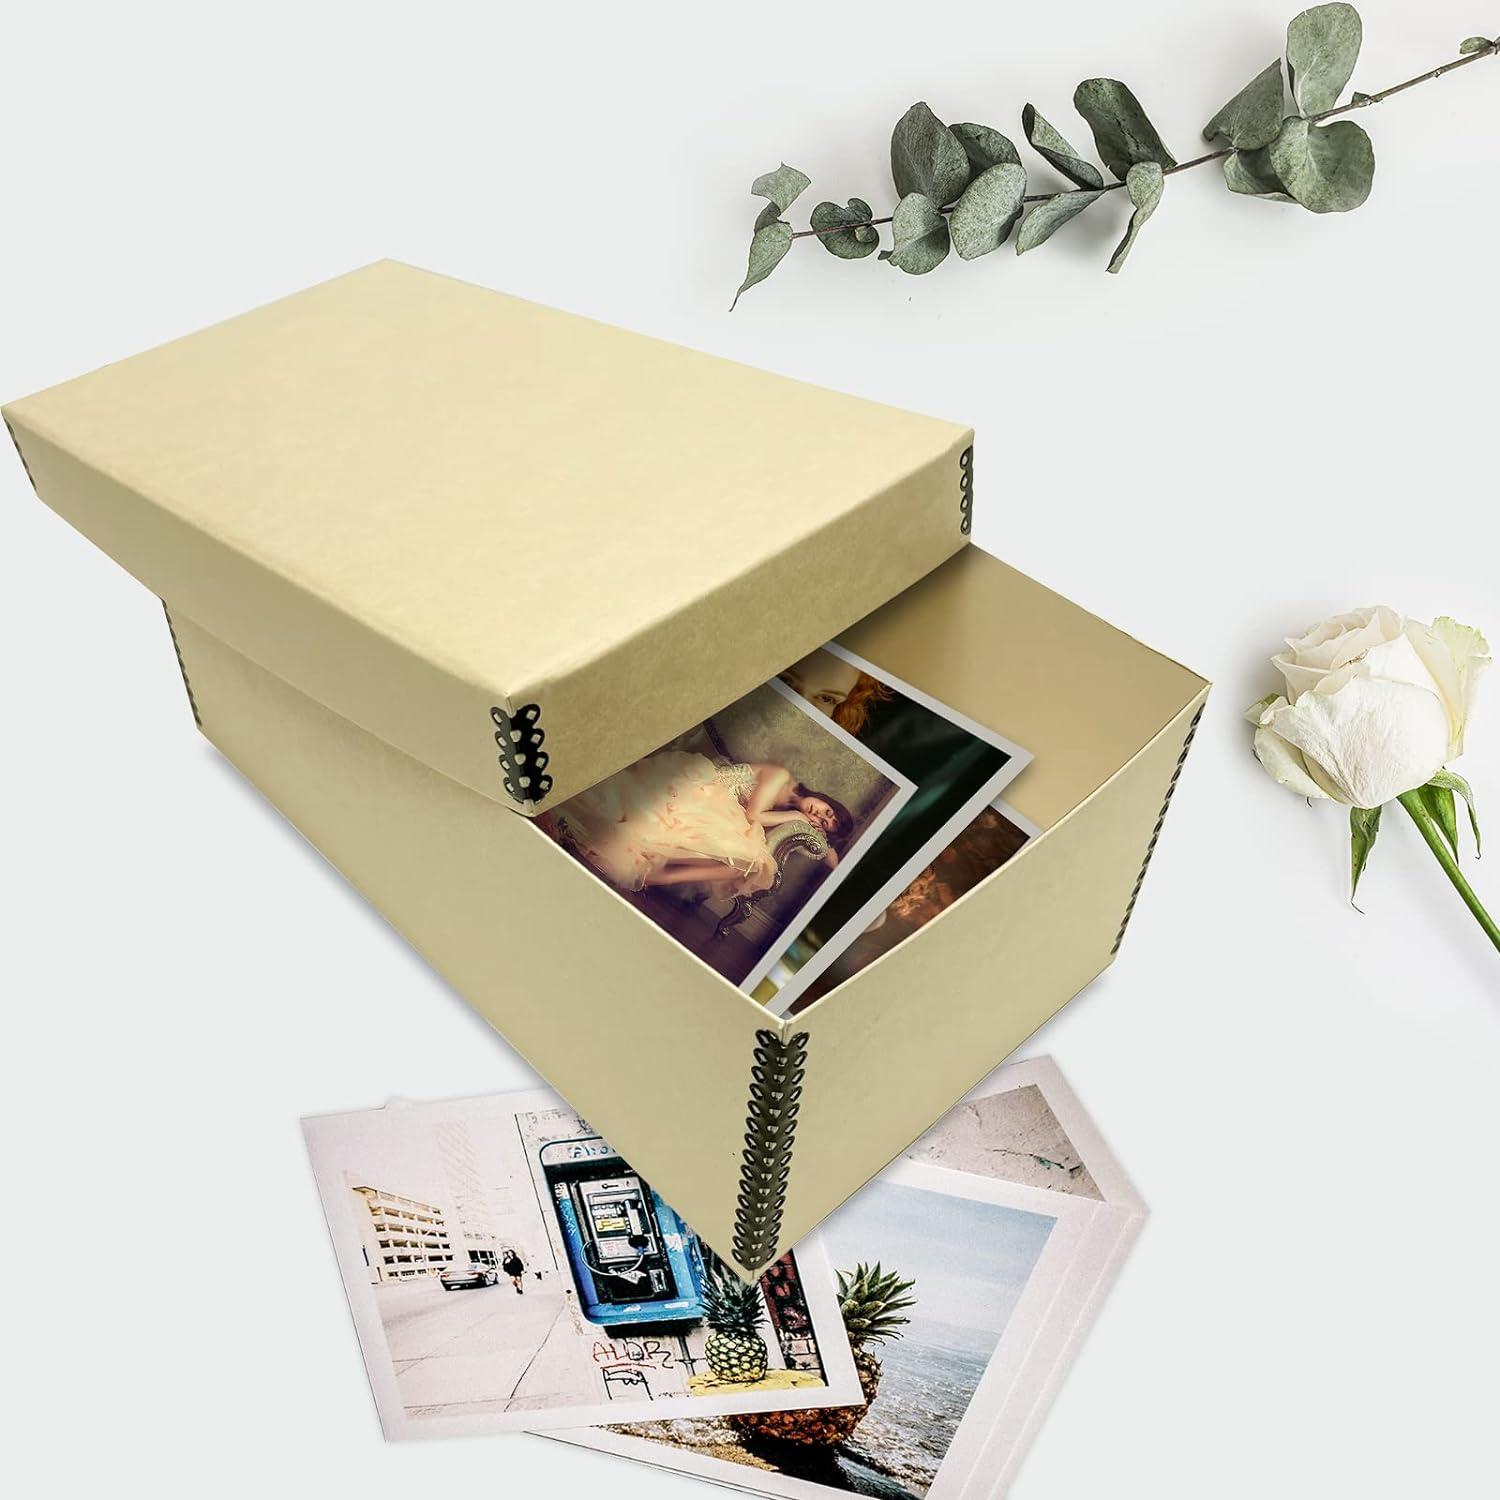 Lineco Tan Photo Storage Box 4x6x12 Inches with Drop Front Design